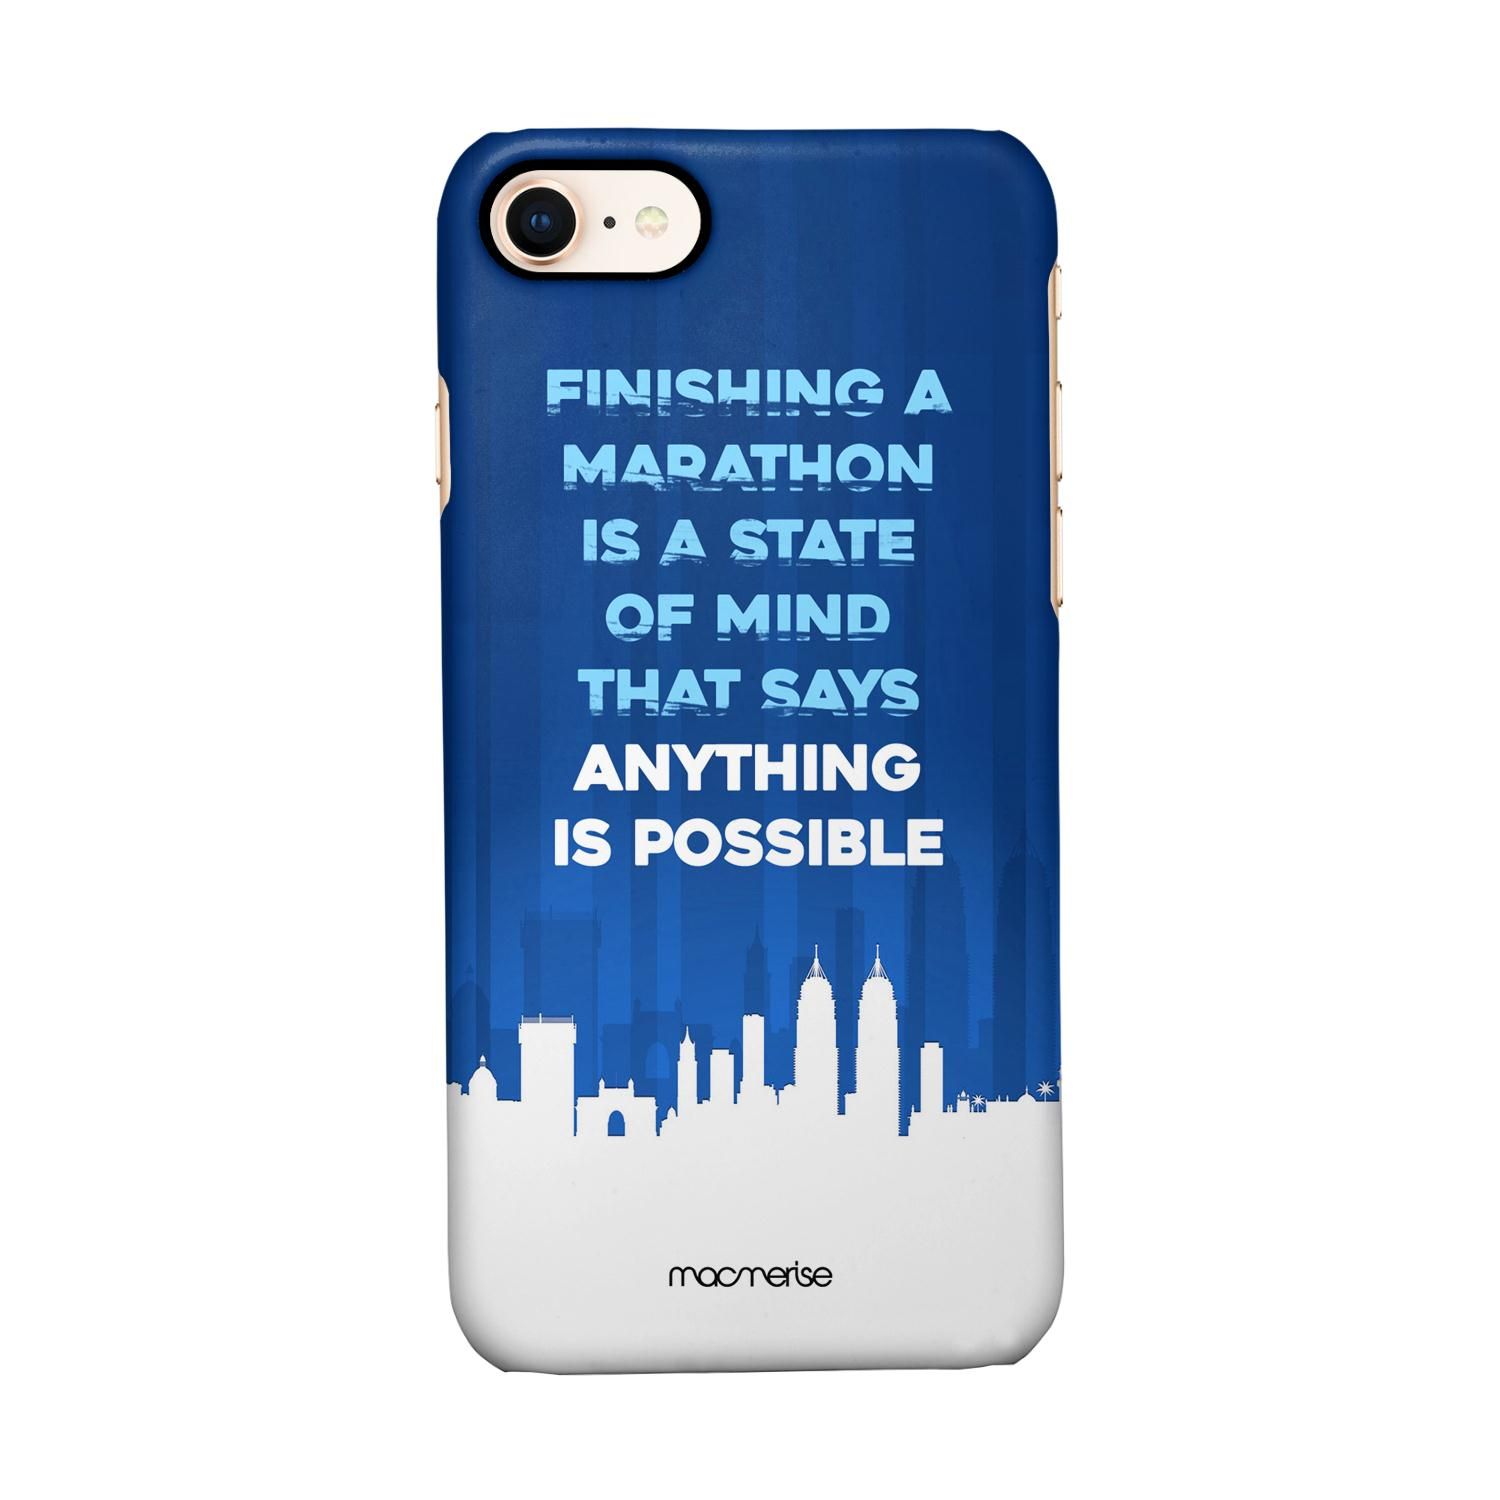 Buy Anything Is Possible - Sleek Phone Case for iPhone 7 Online